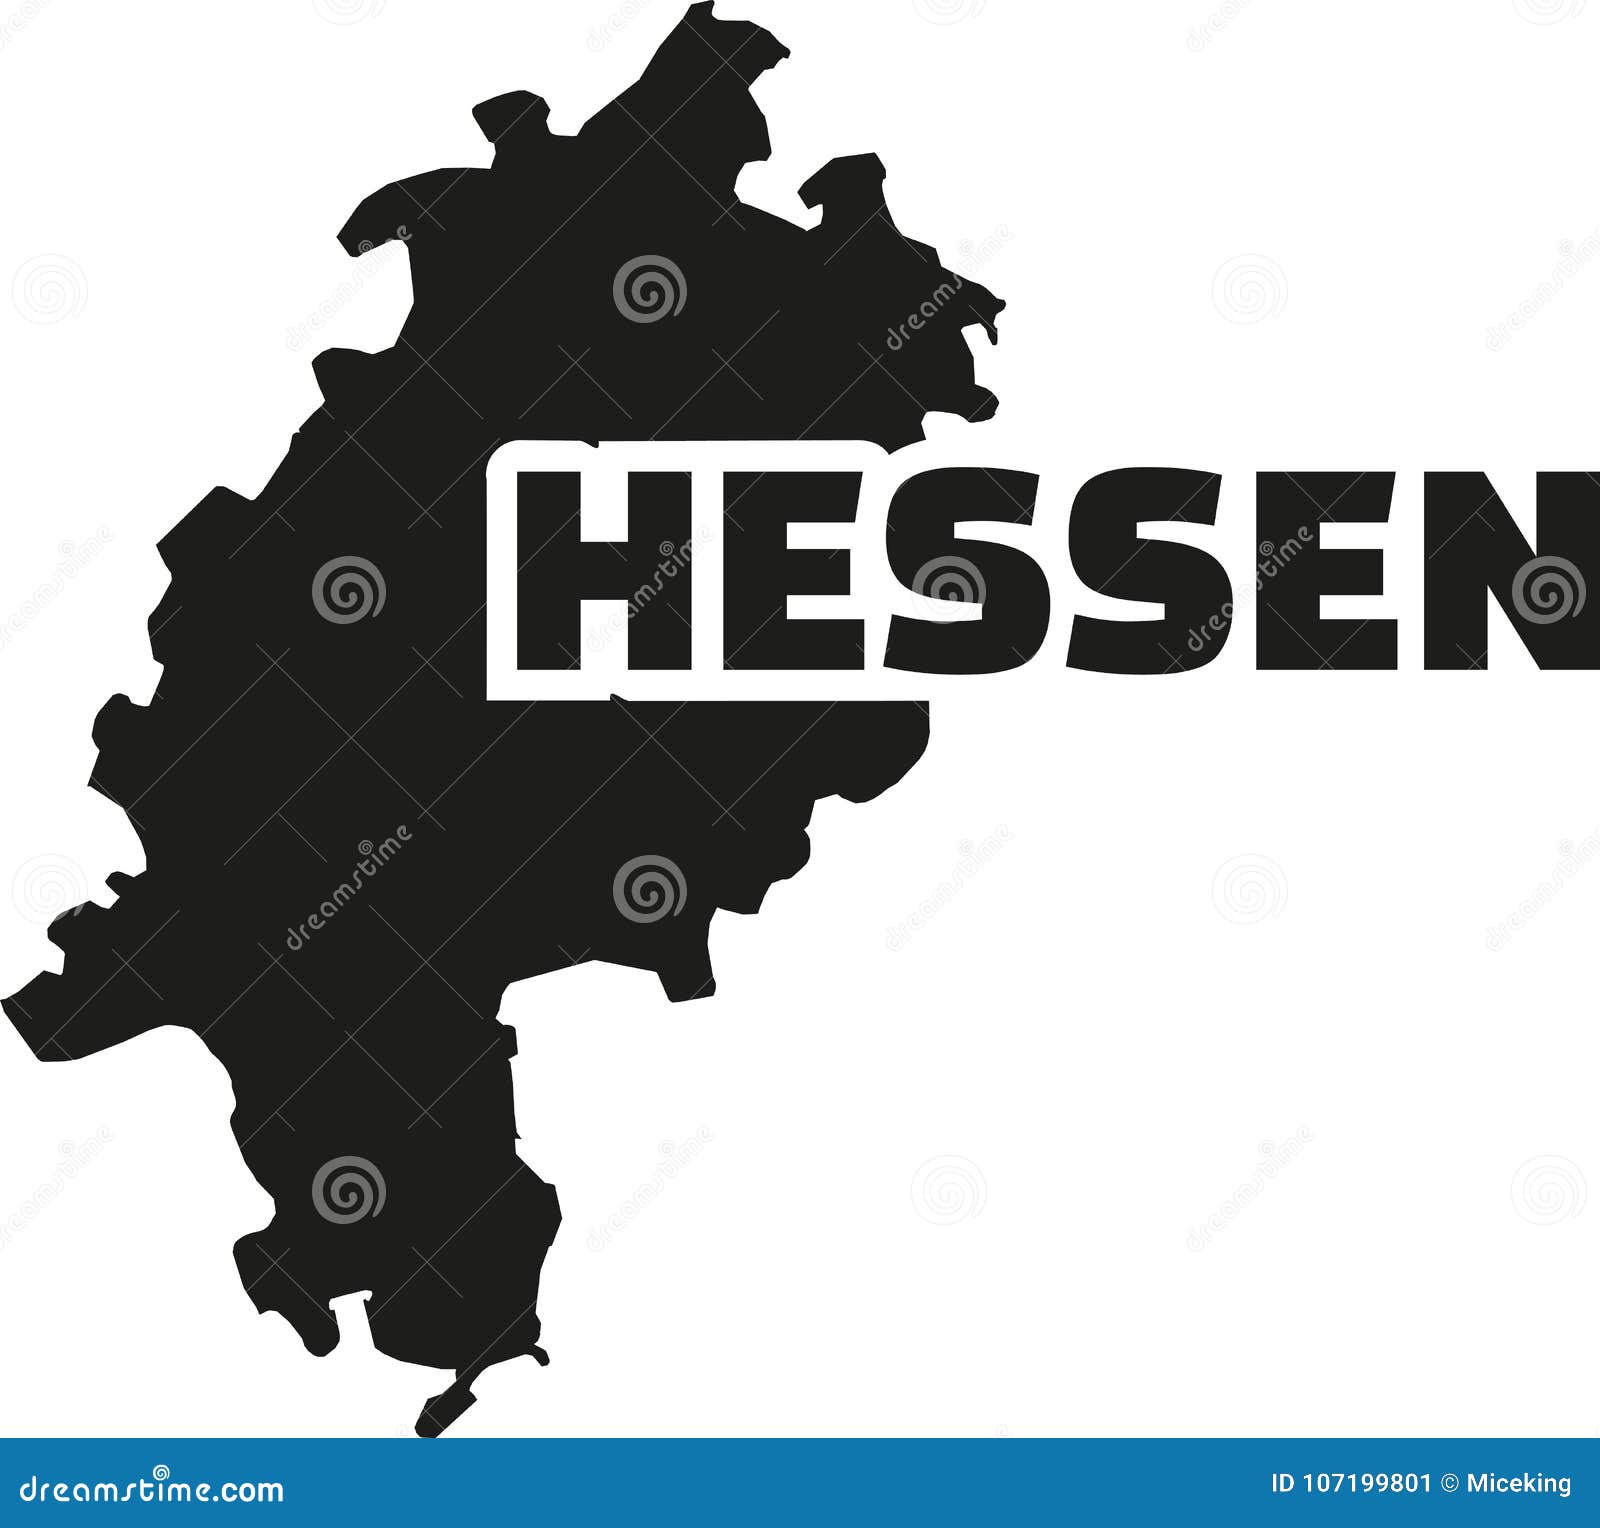 hessen map with german title